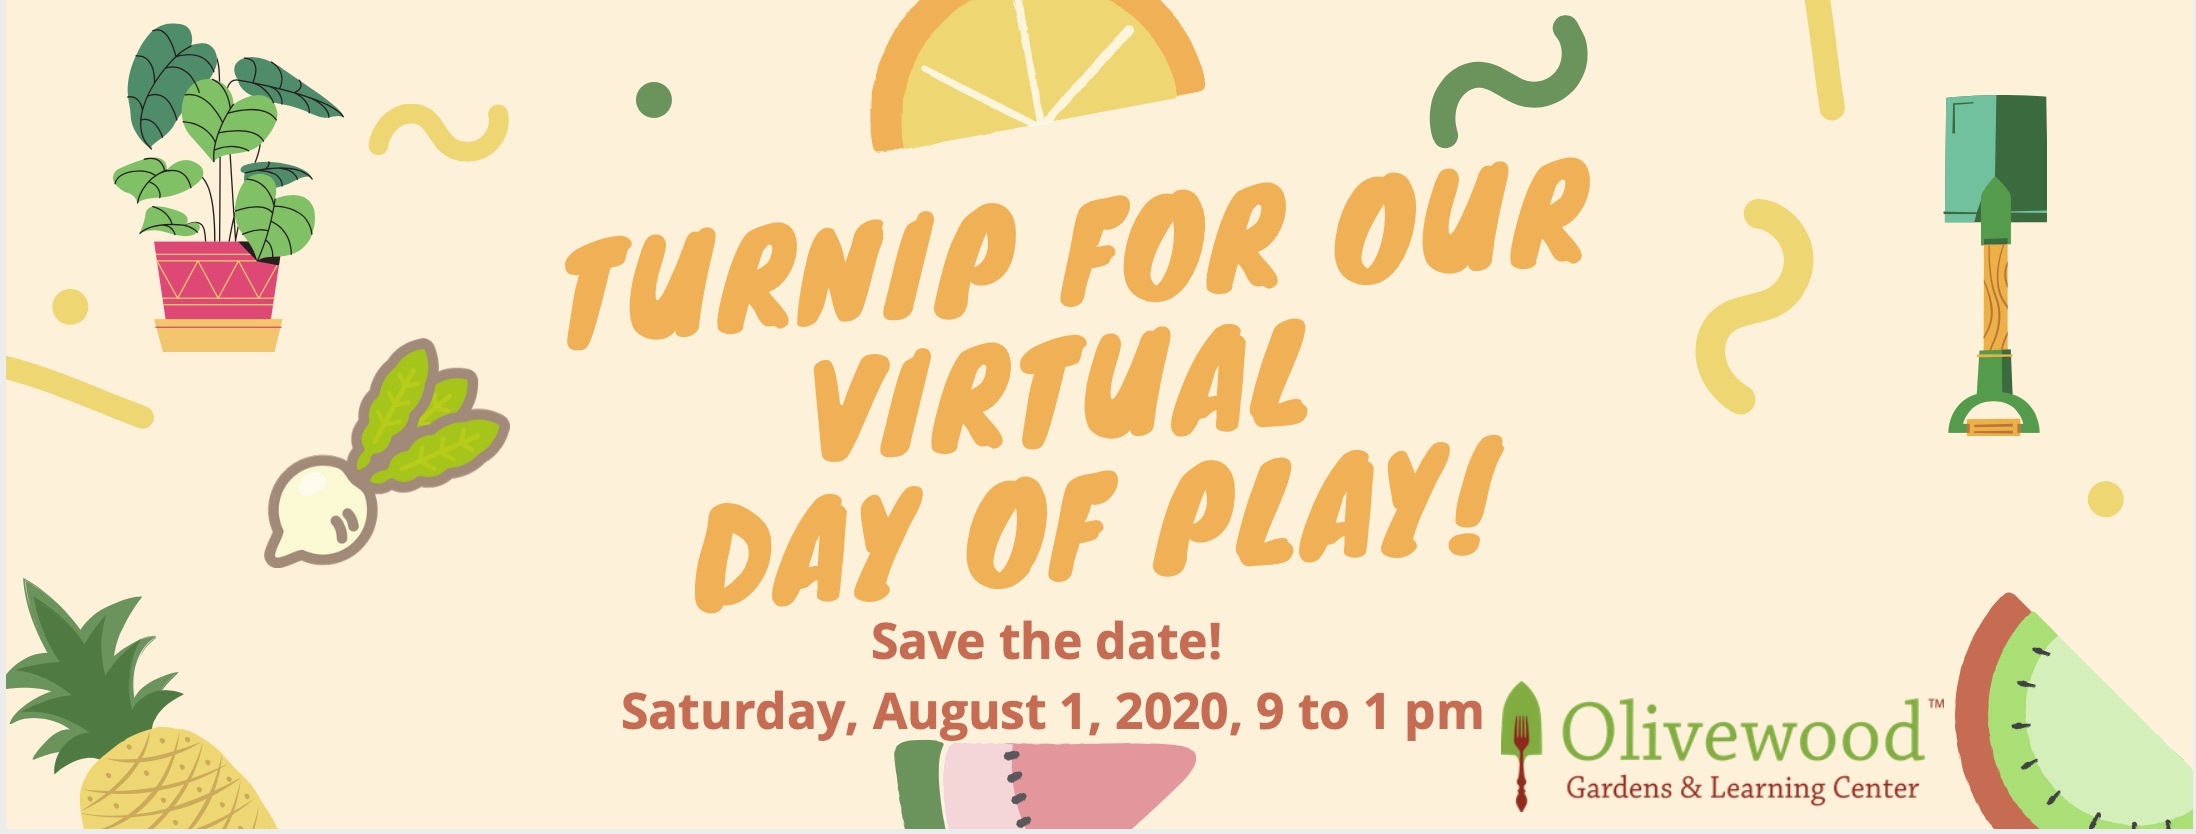 2020 Virtual Day of Play